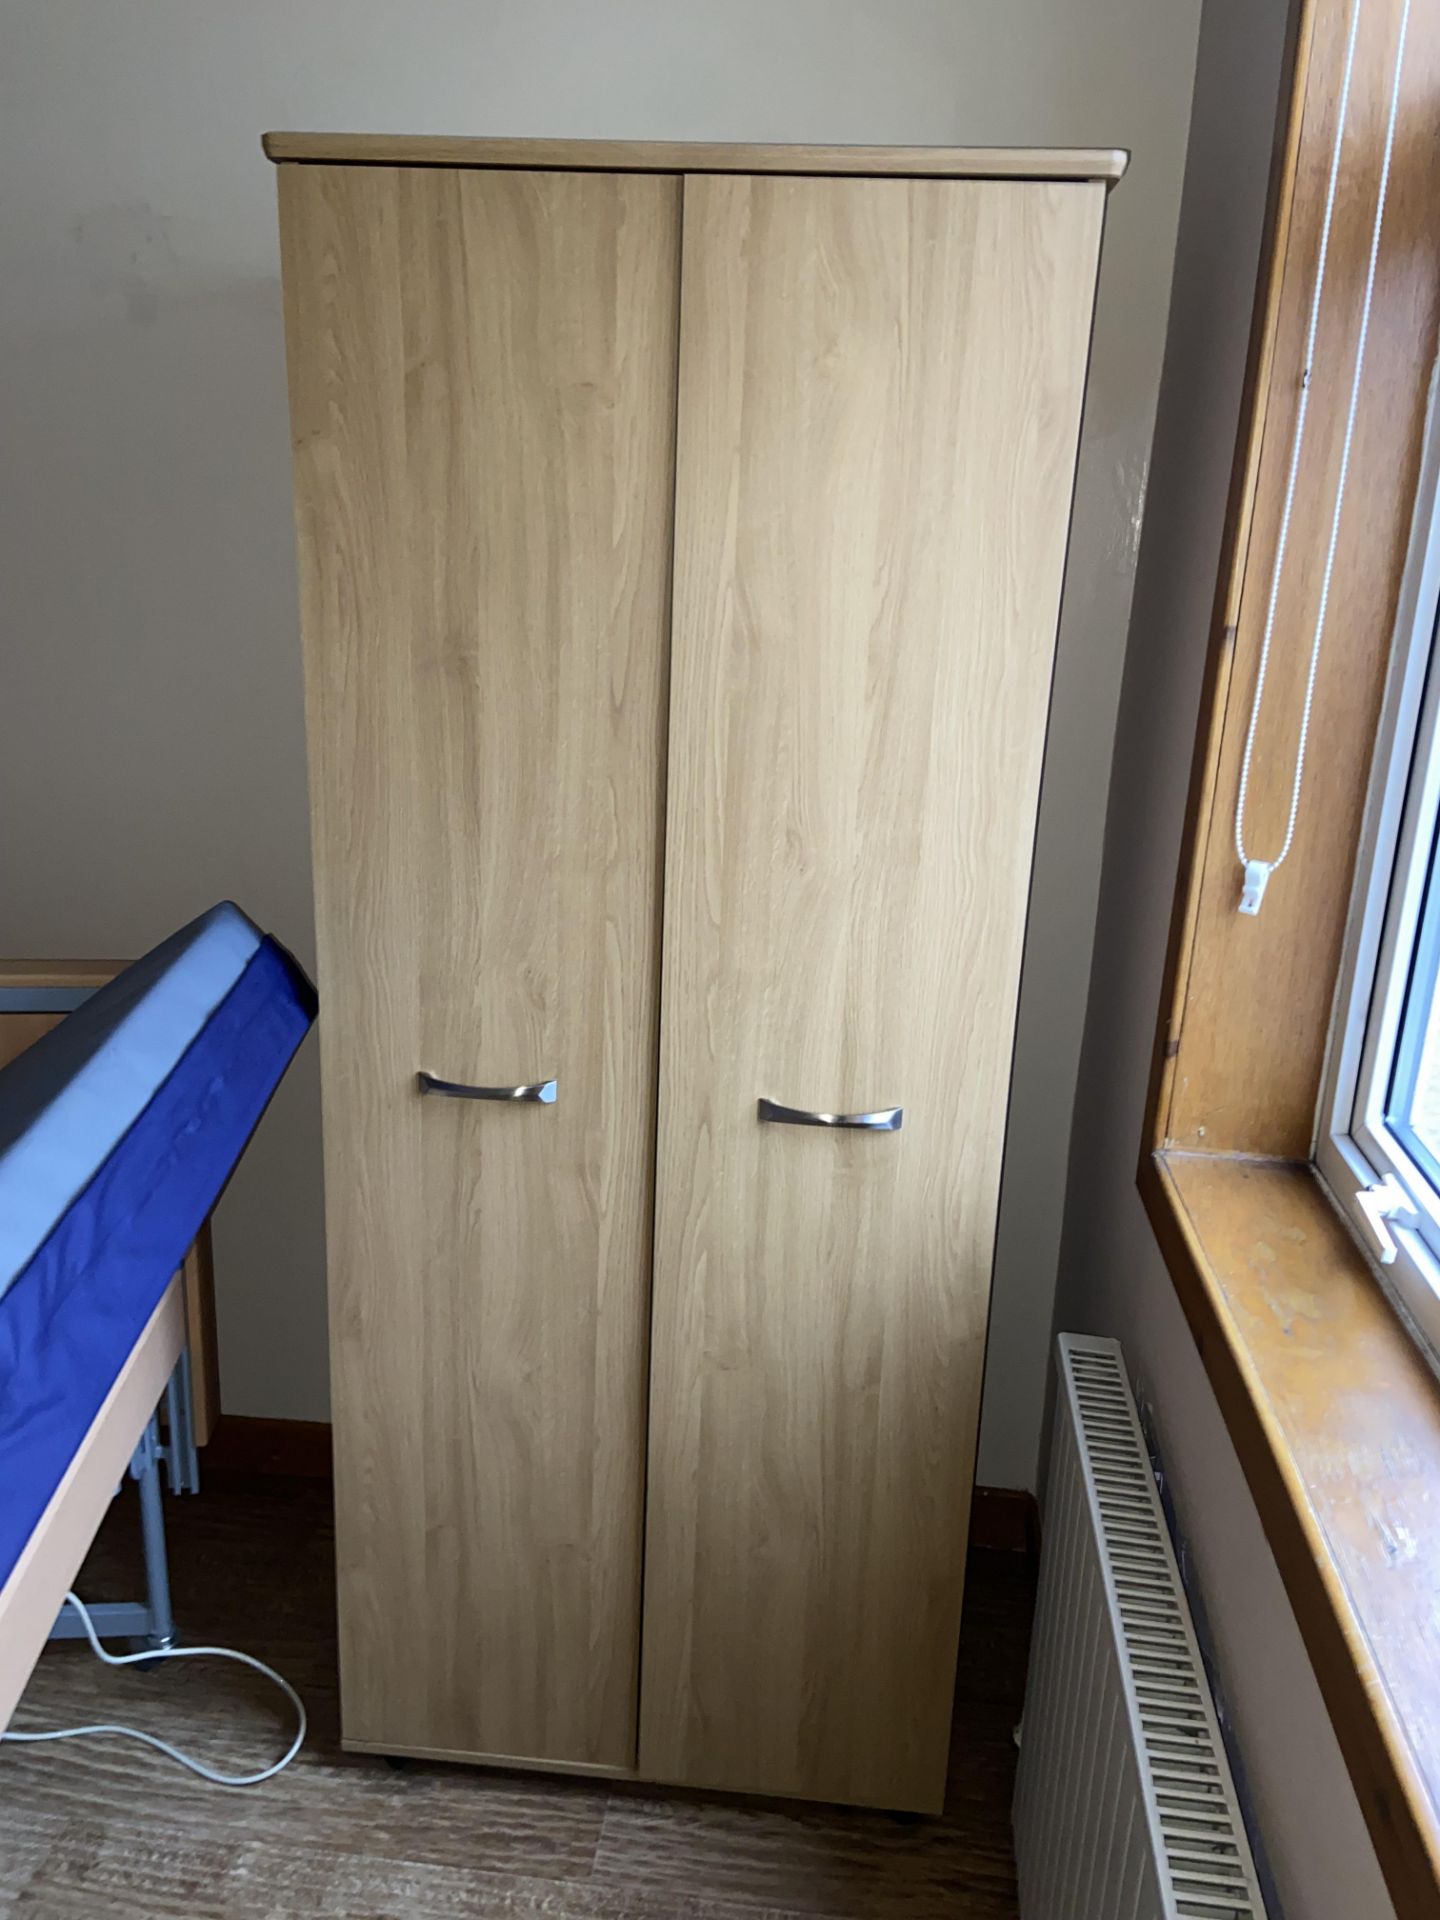 Remaining Bedroom Furniture, including oak laminated wardrobe, three drawer chest-of-drawers, - Image 3 of 3